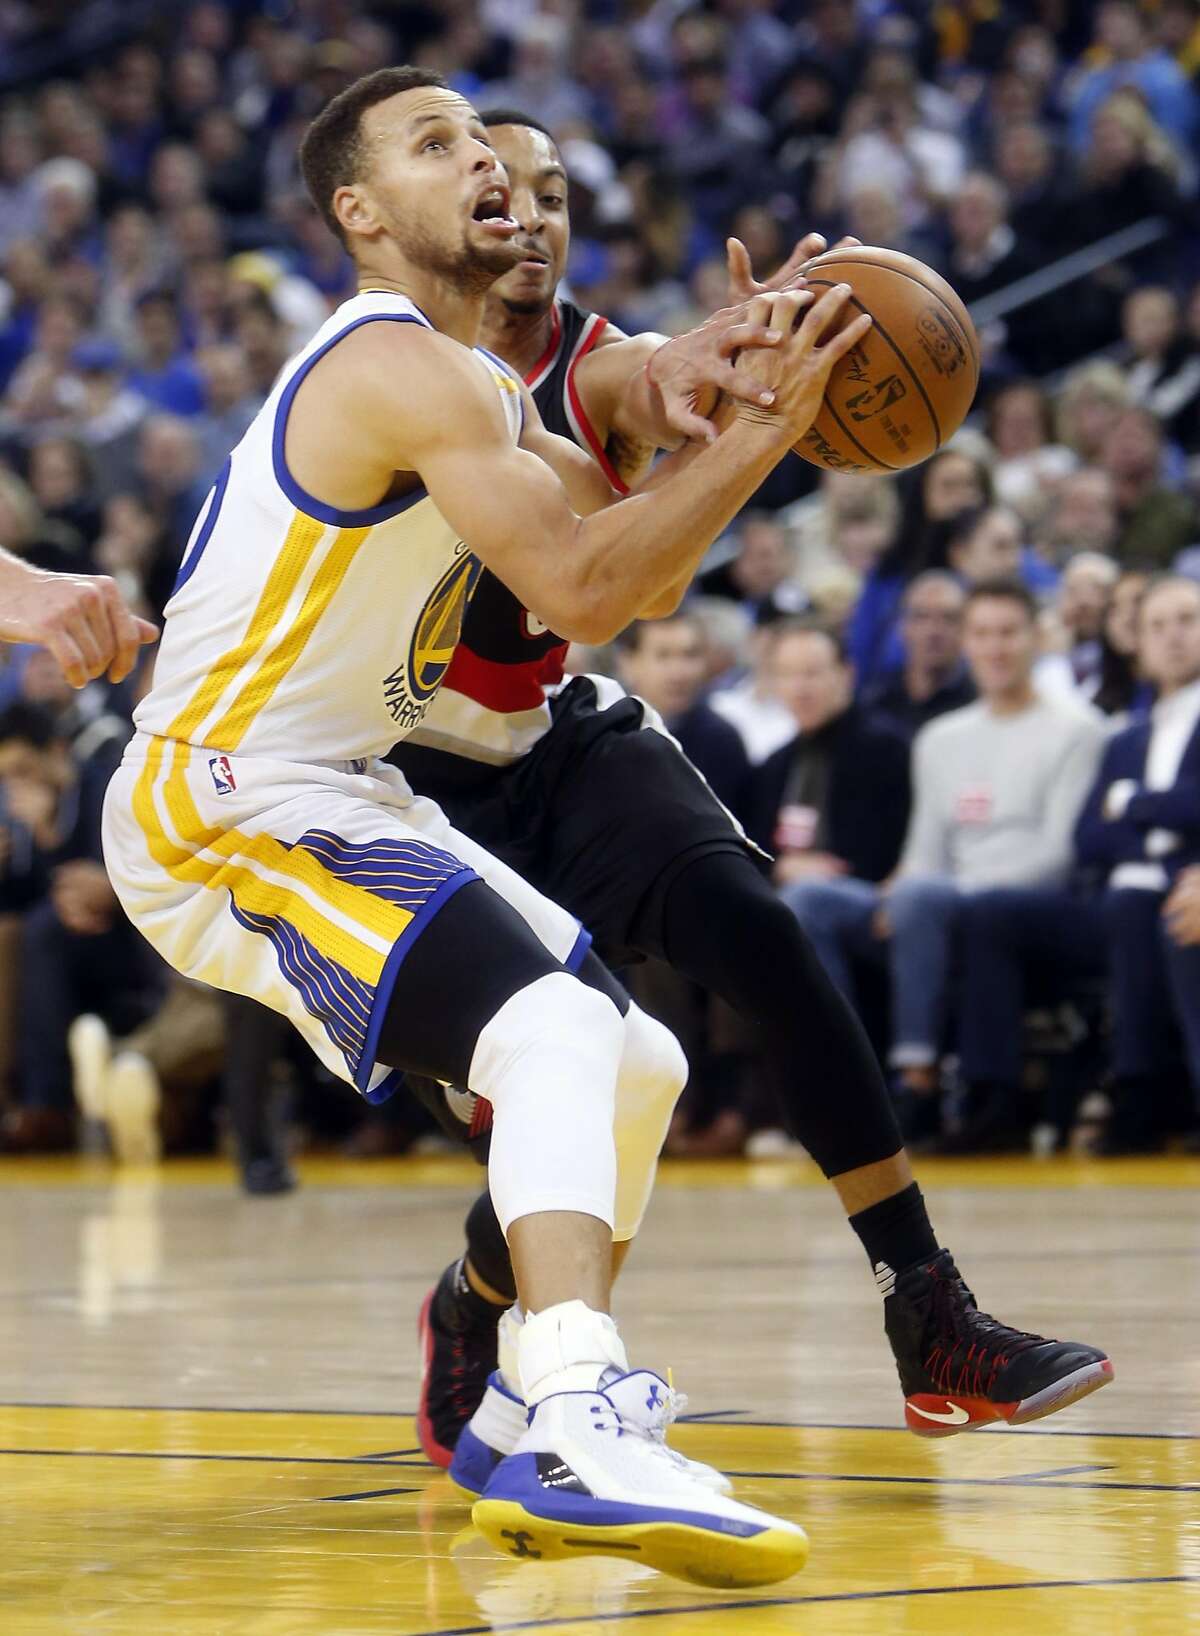 Golden State Warriors' Stephen Curry has the ball knocked away by Portland Trail Blazers' C.J. McCollum in 2nd quarter during NBA game at Oracle Arena in Oakland, Calif., on Wednesday, January 4, 2017.